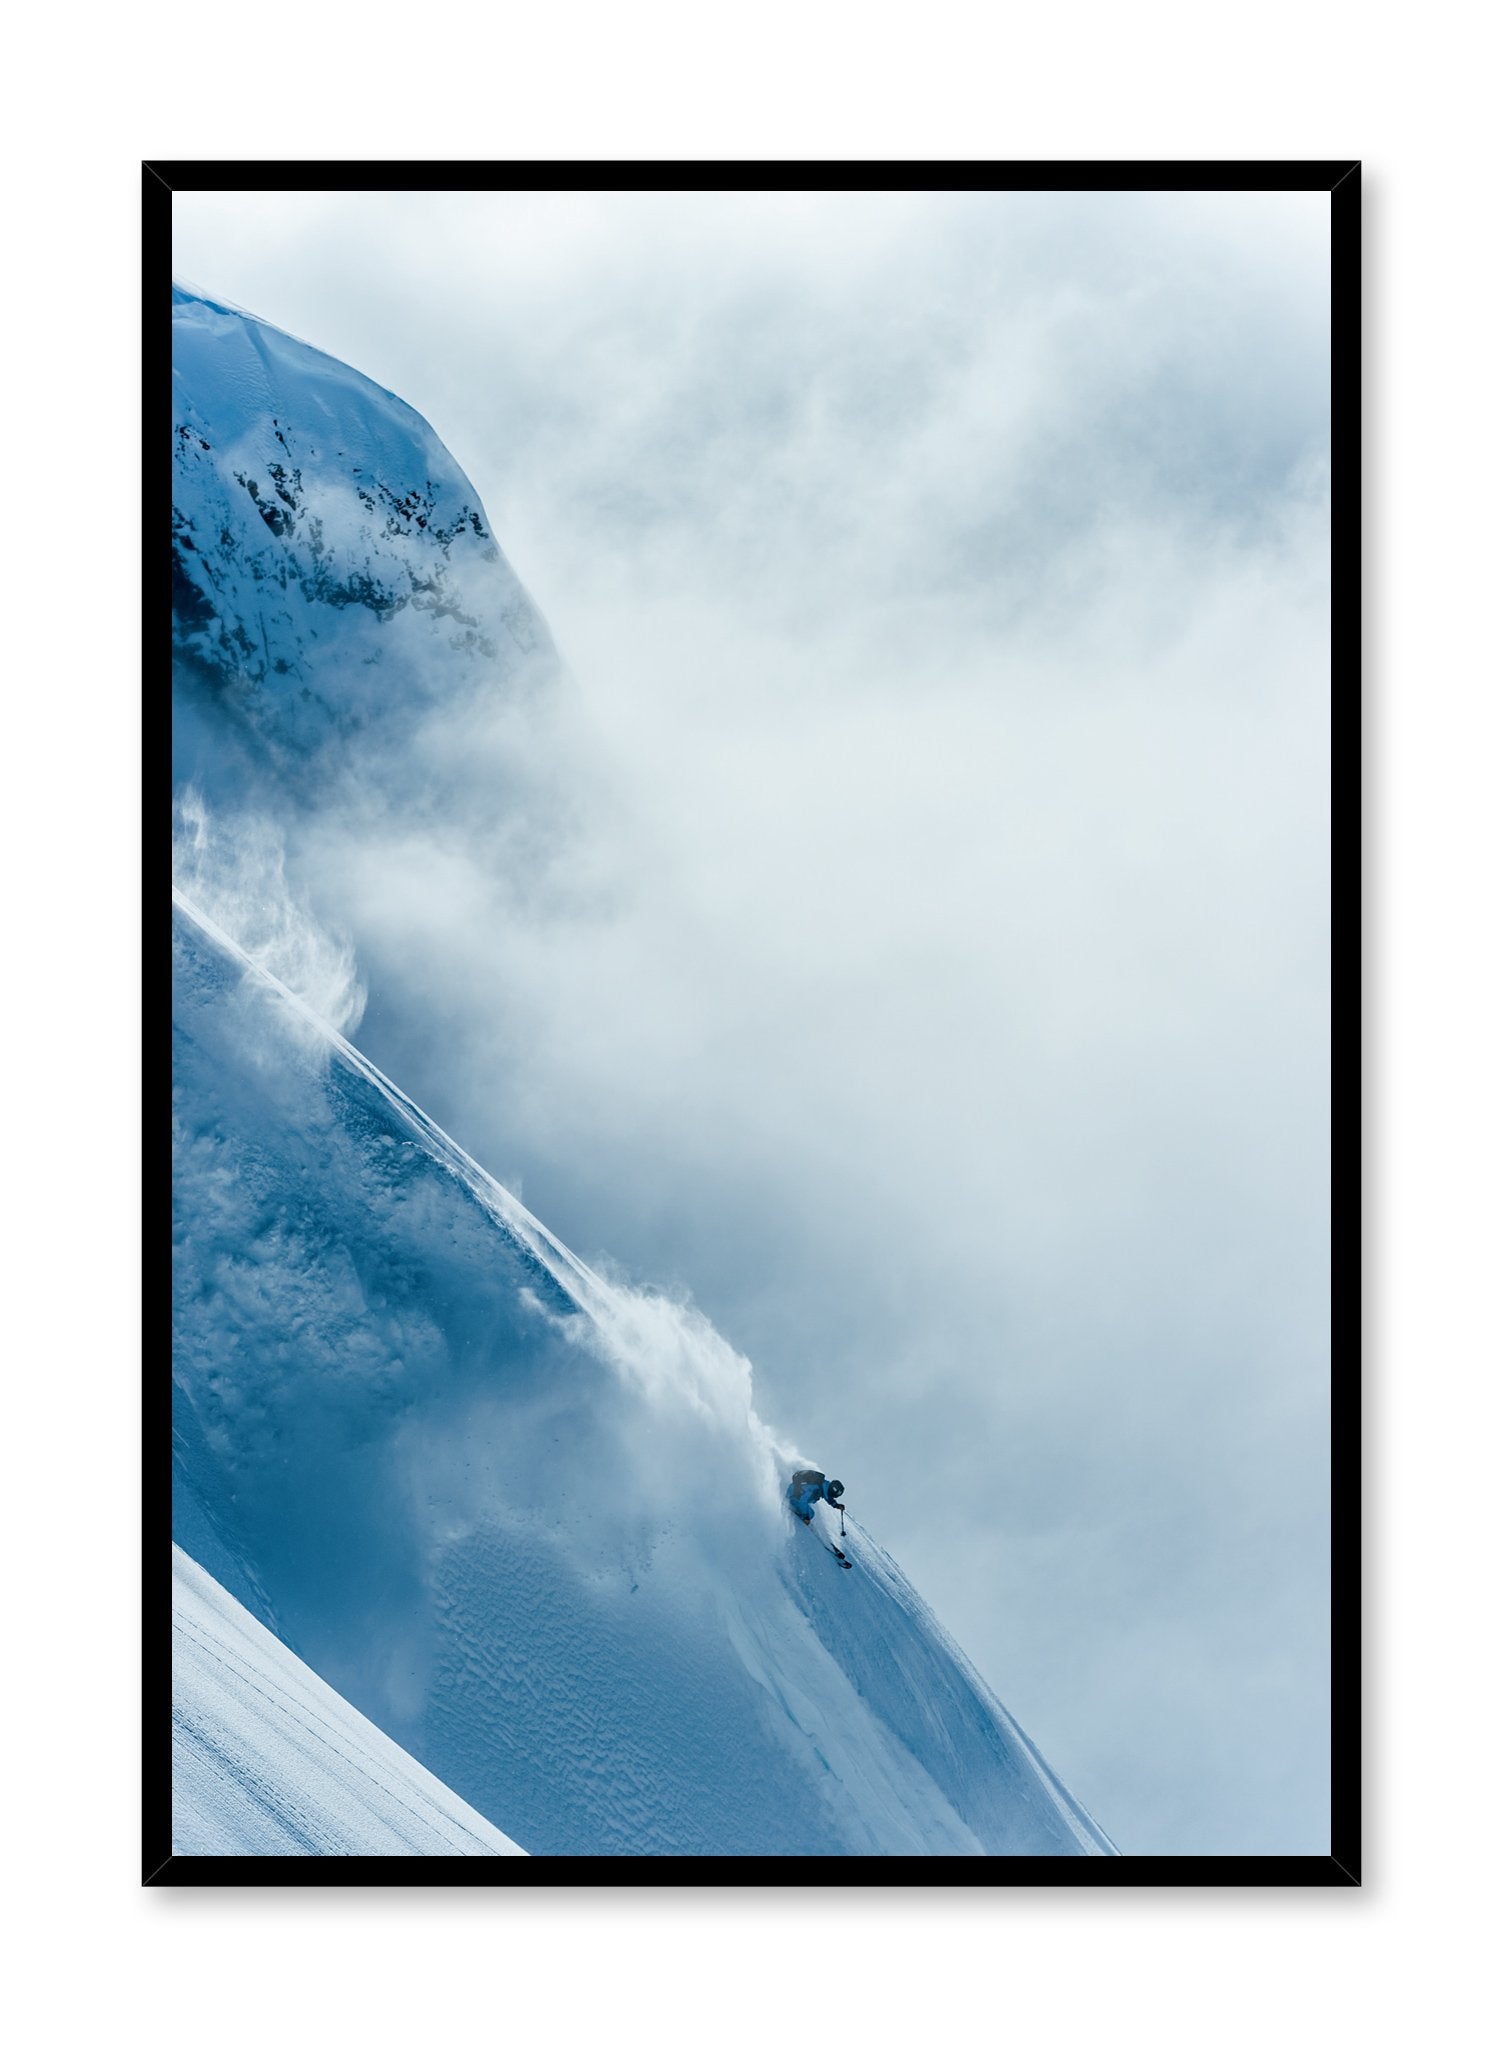 Landscape photography poster by Opposite Wall with snowy mountain and and extreme skier